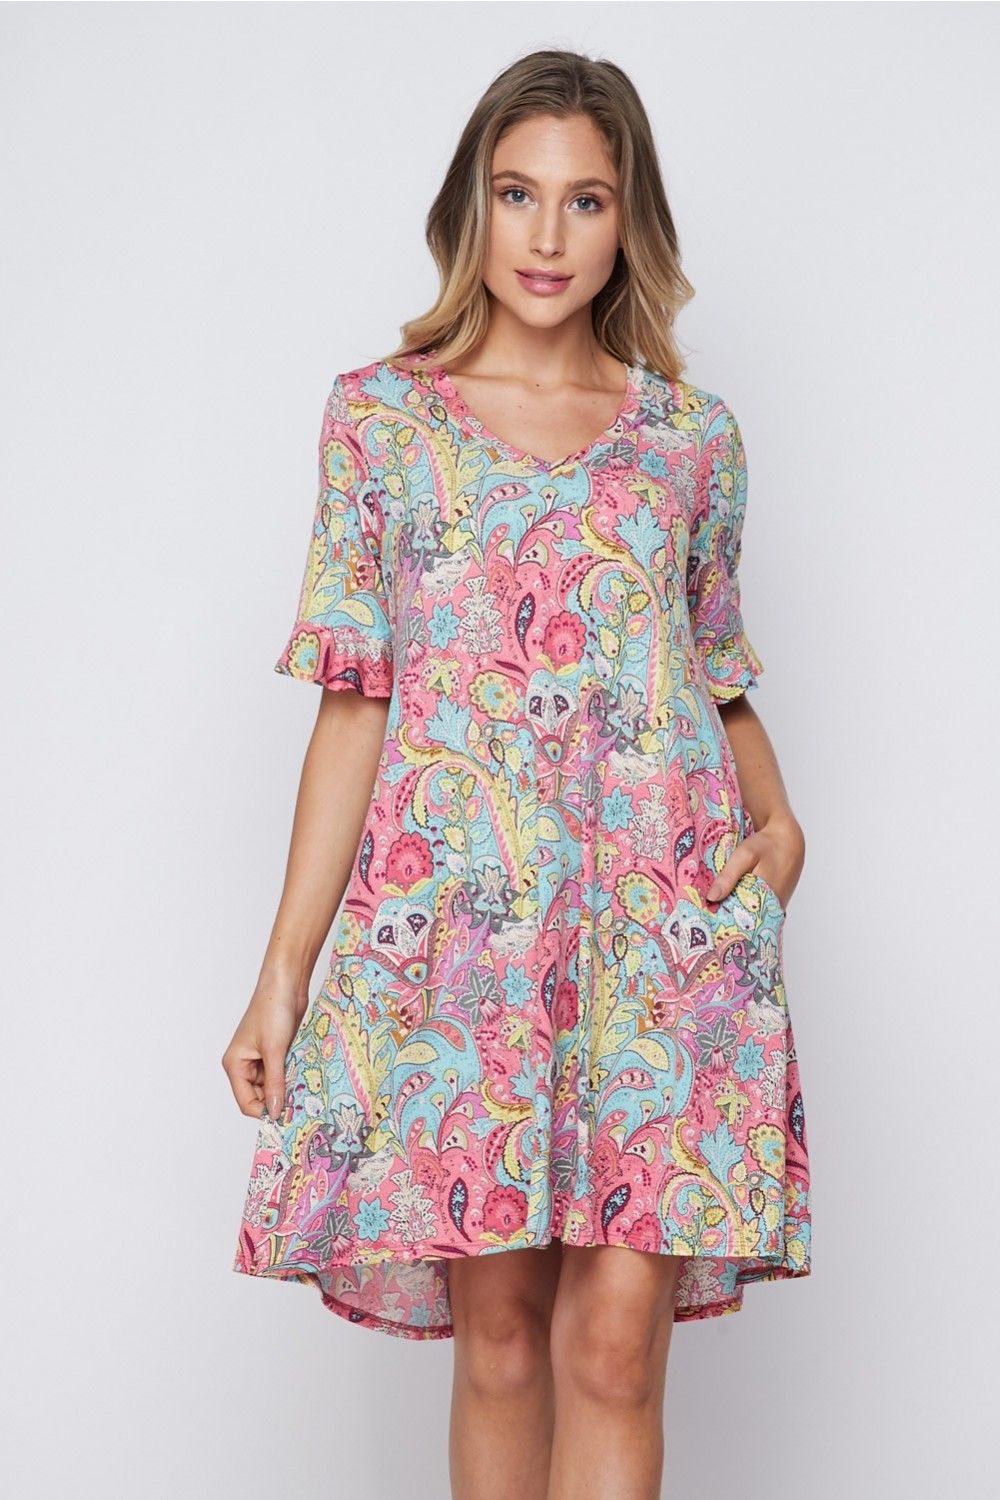 Honeyme Dress with Ruffle Sleeves & V-Neck - Pastel Floral Paisley Print